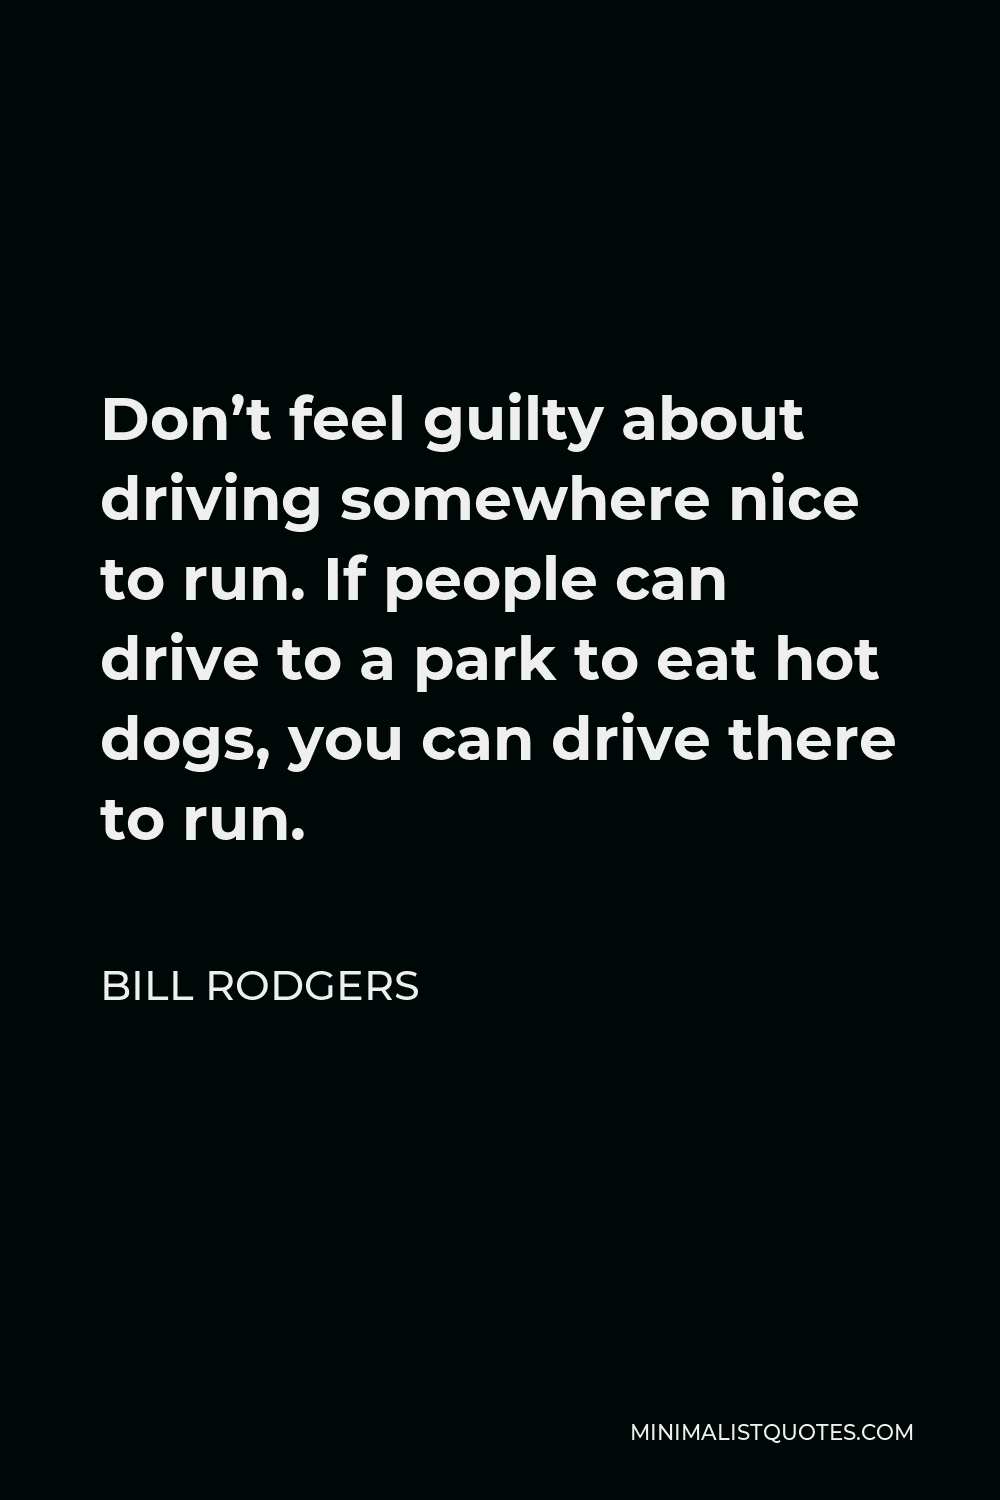 Bill Rodgers Quote - Don’t feel guilty about driving somewhere nice to run. If people can drive to a park to eat hot dogs, you can drive there to run.